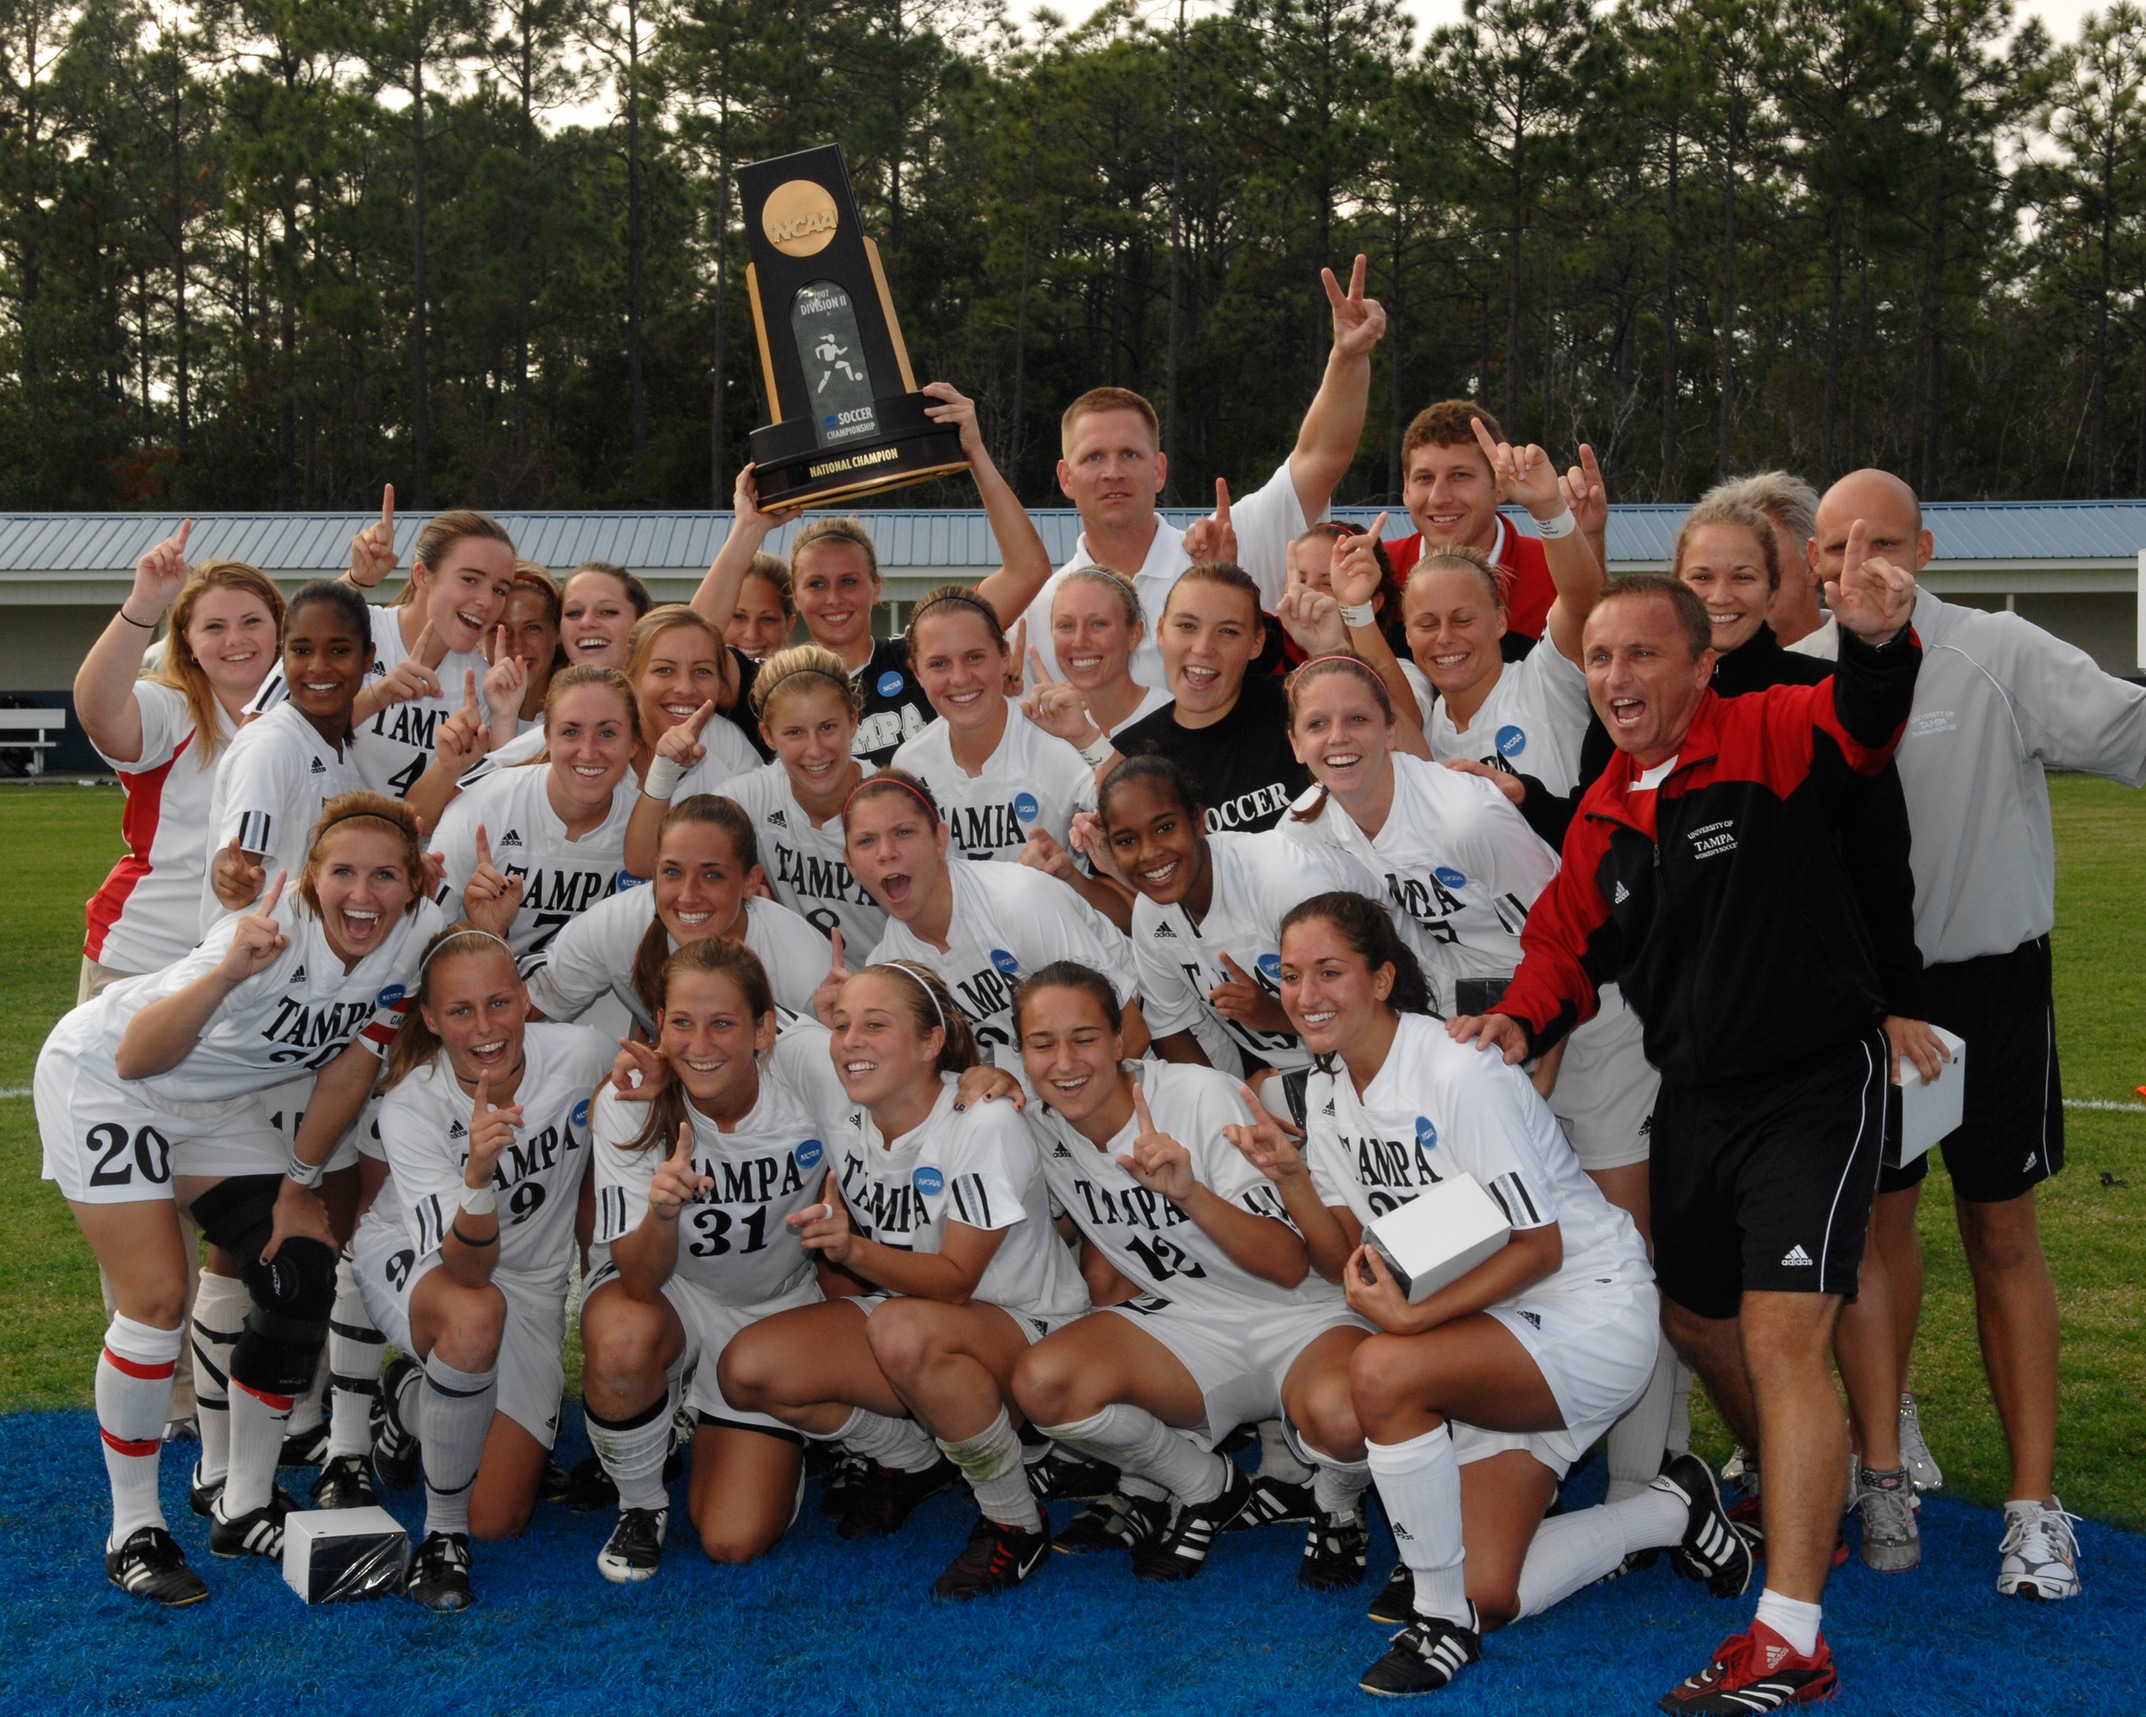 2007 NCAA Division II National Champions